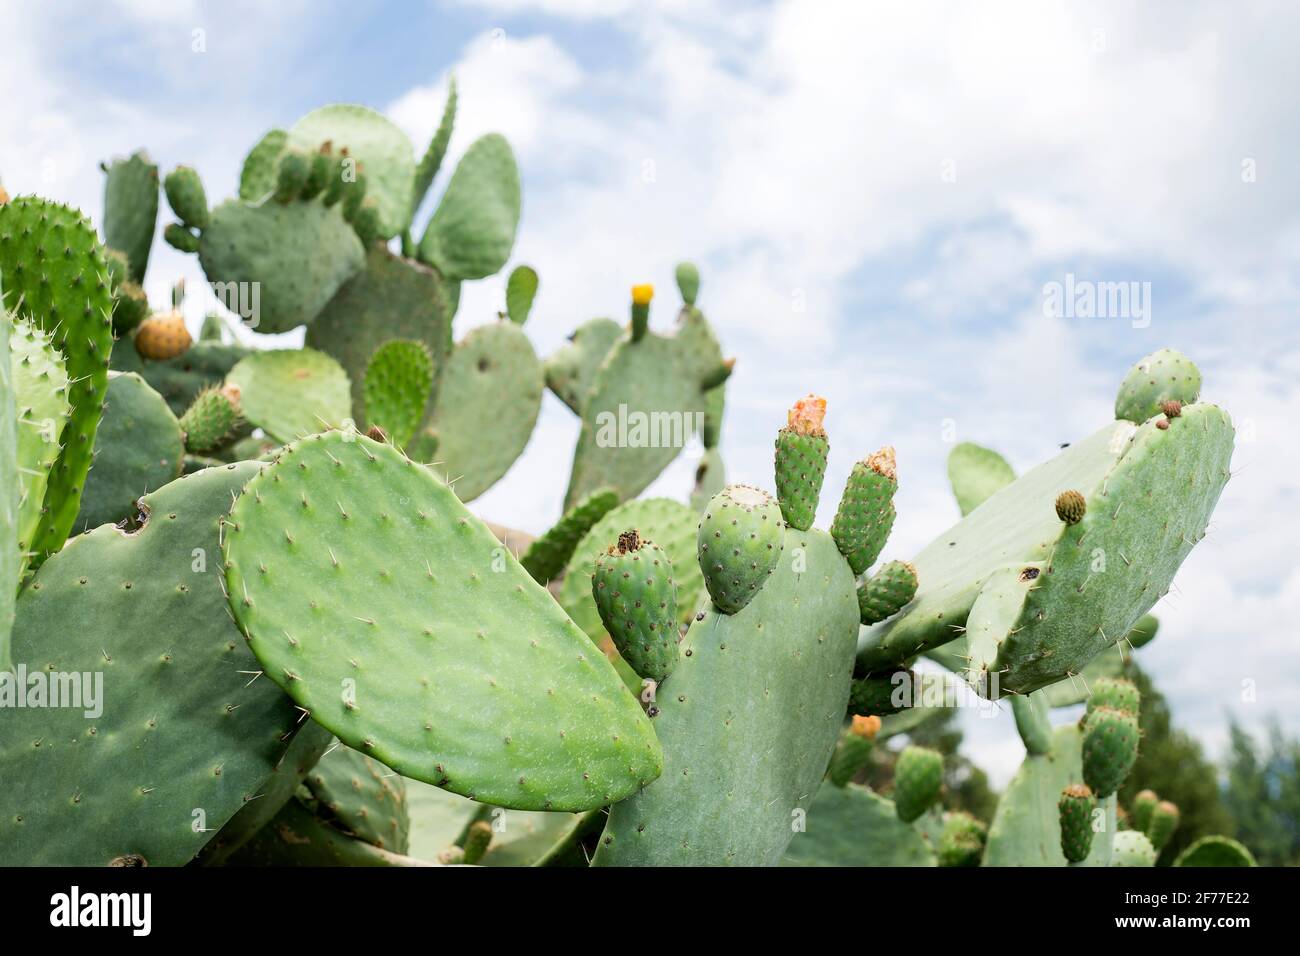 Opuntia ficus-indica with prickly pear fruits Stock Photo